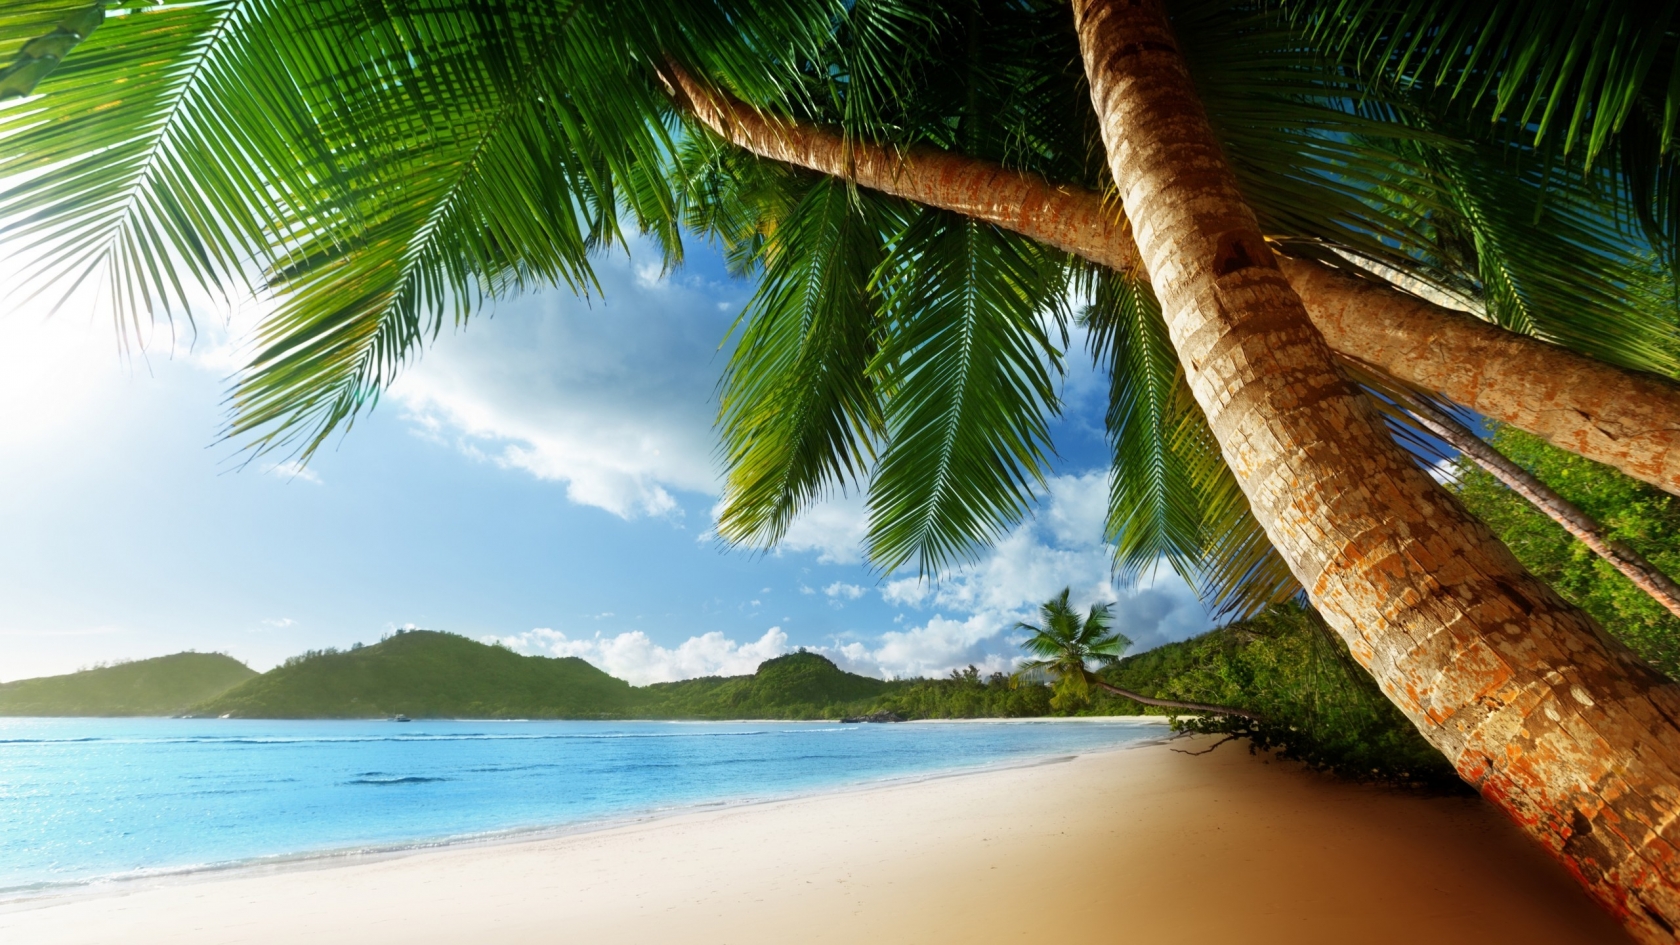 Exotic Palm Island for 1680 x 945 HDTV resolution